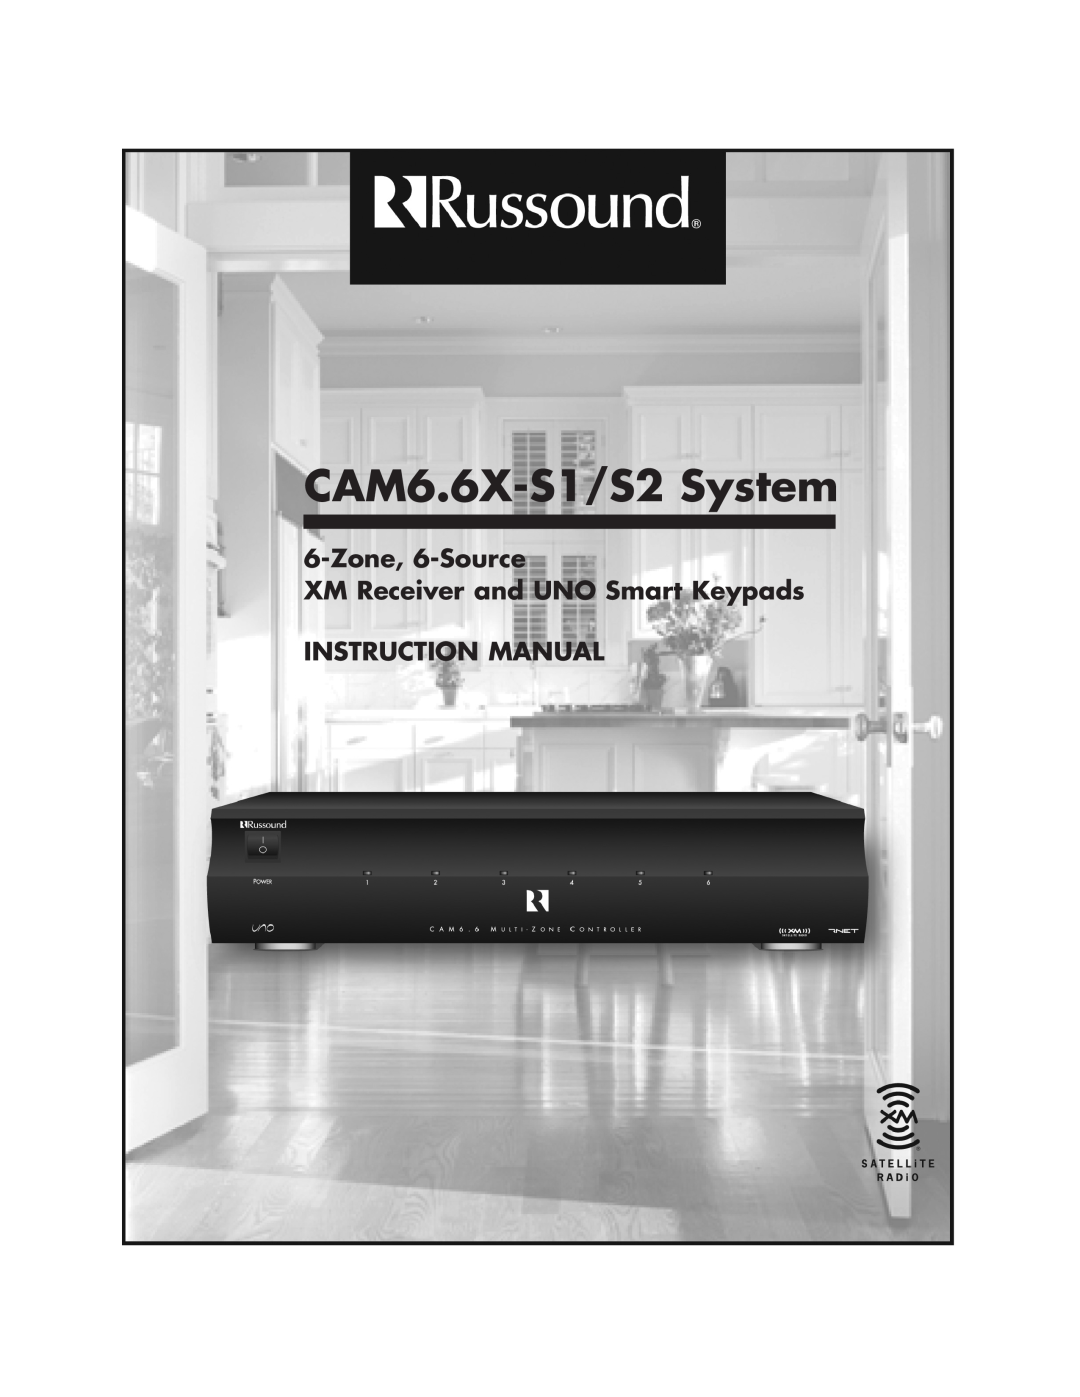 Russound CAM6.6X-S1/S2 instruction manual Zone, 6-Source, XM Receiver and UNO Smart Keypads, Instruction Manual 